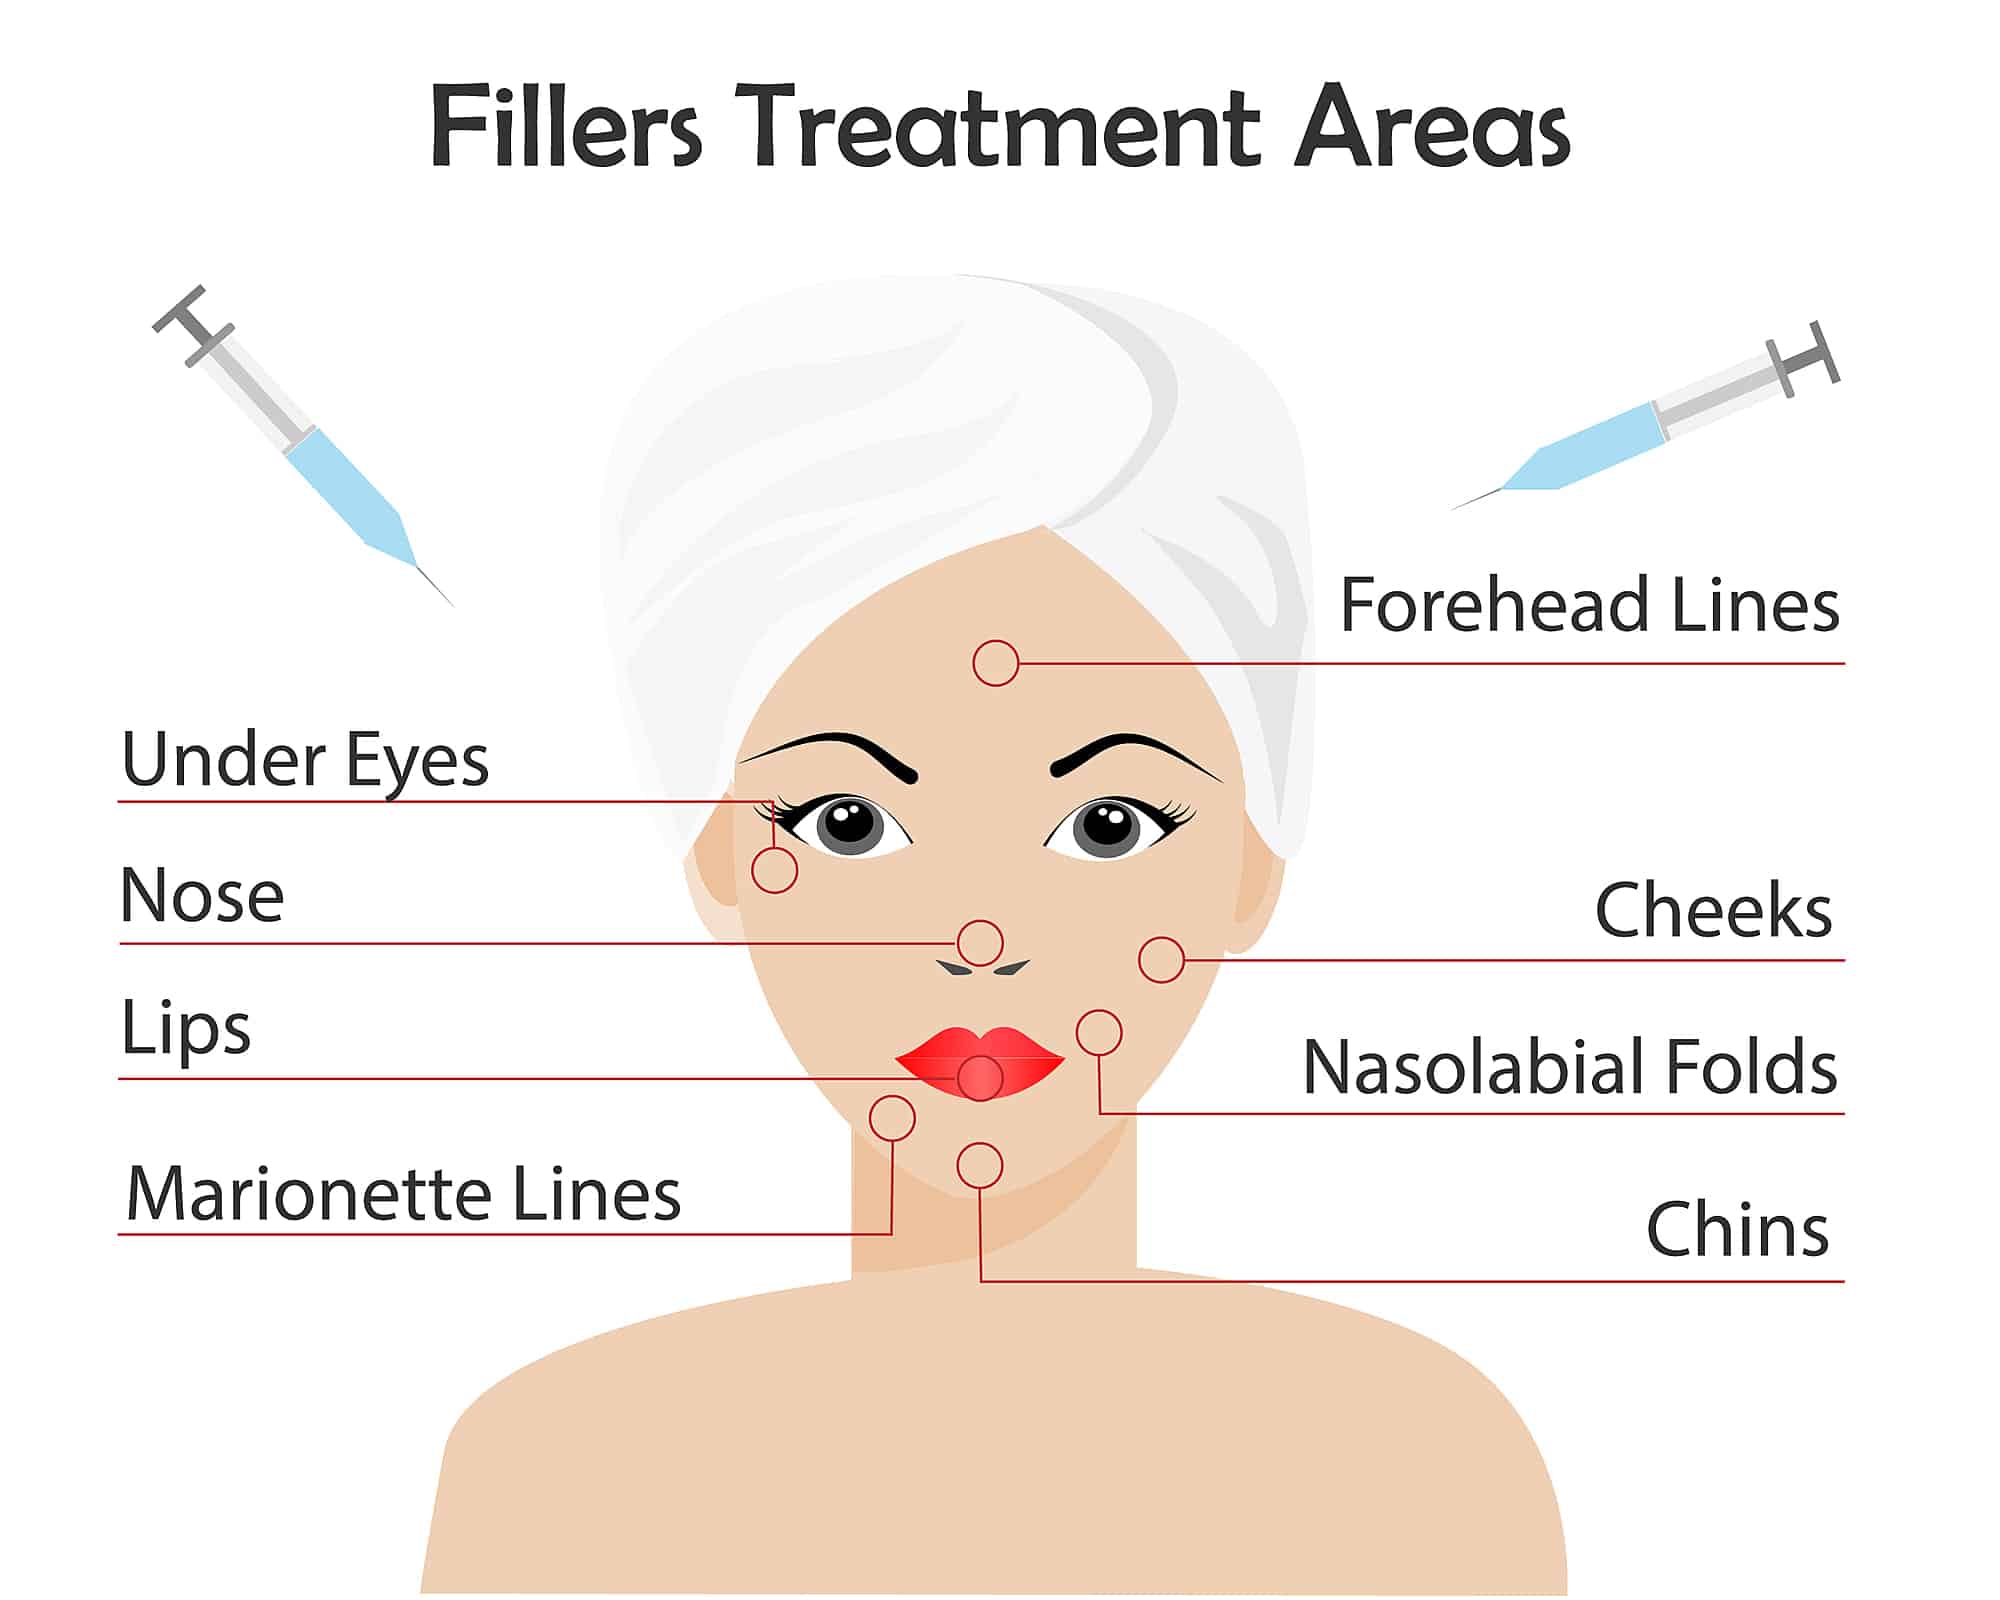 Filler Treatment Areas